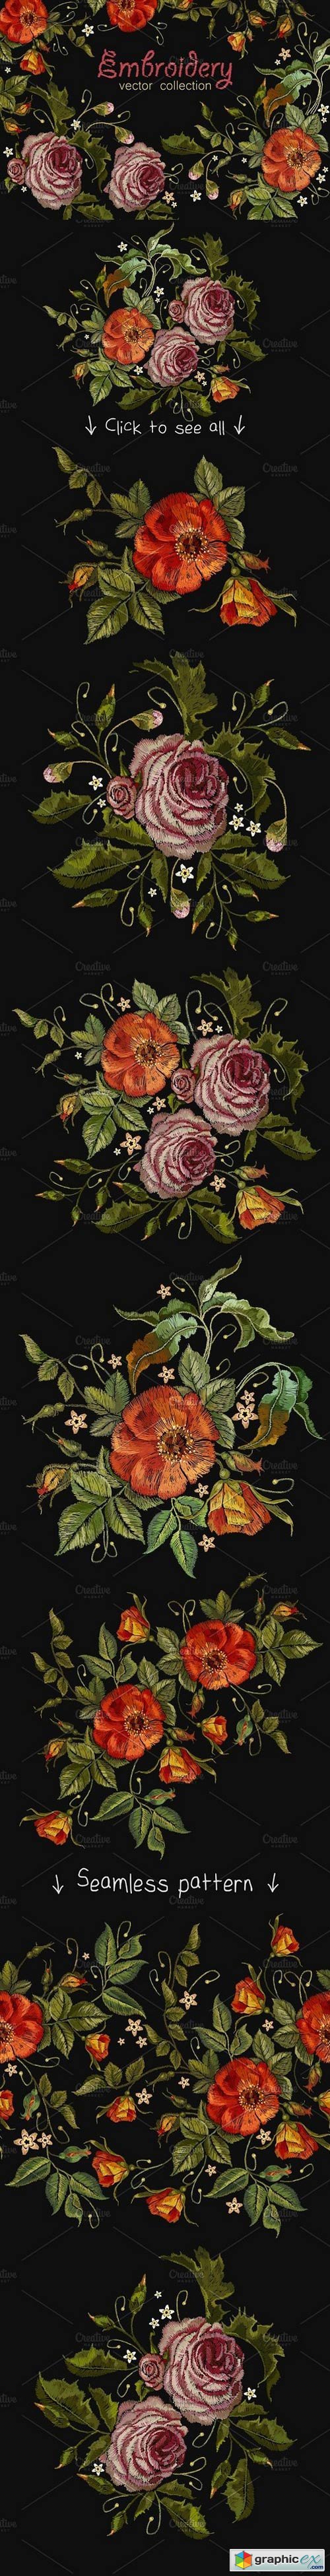 Roses embroidery